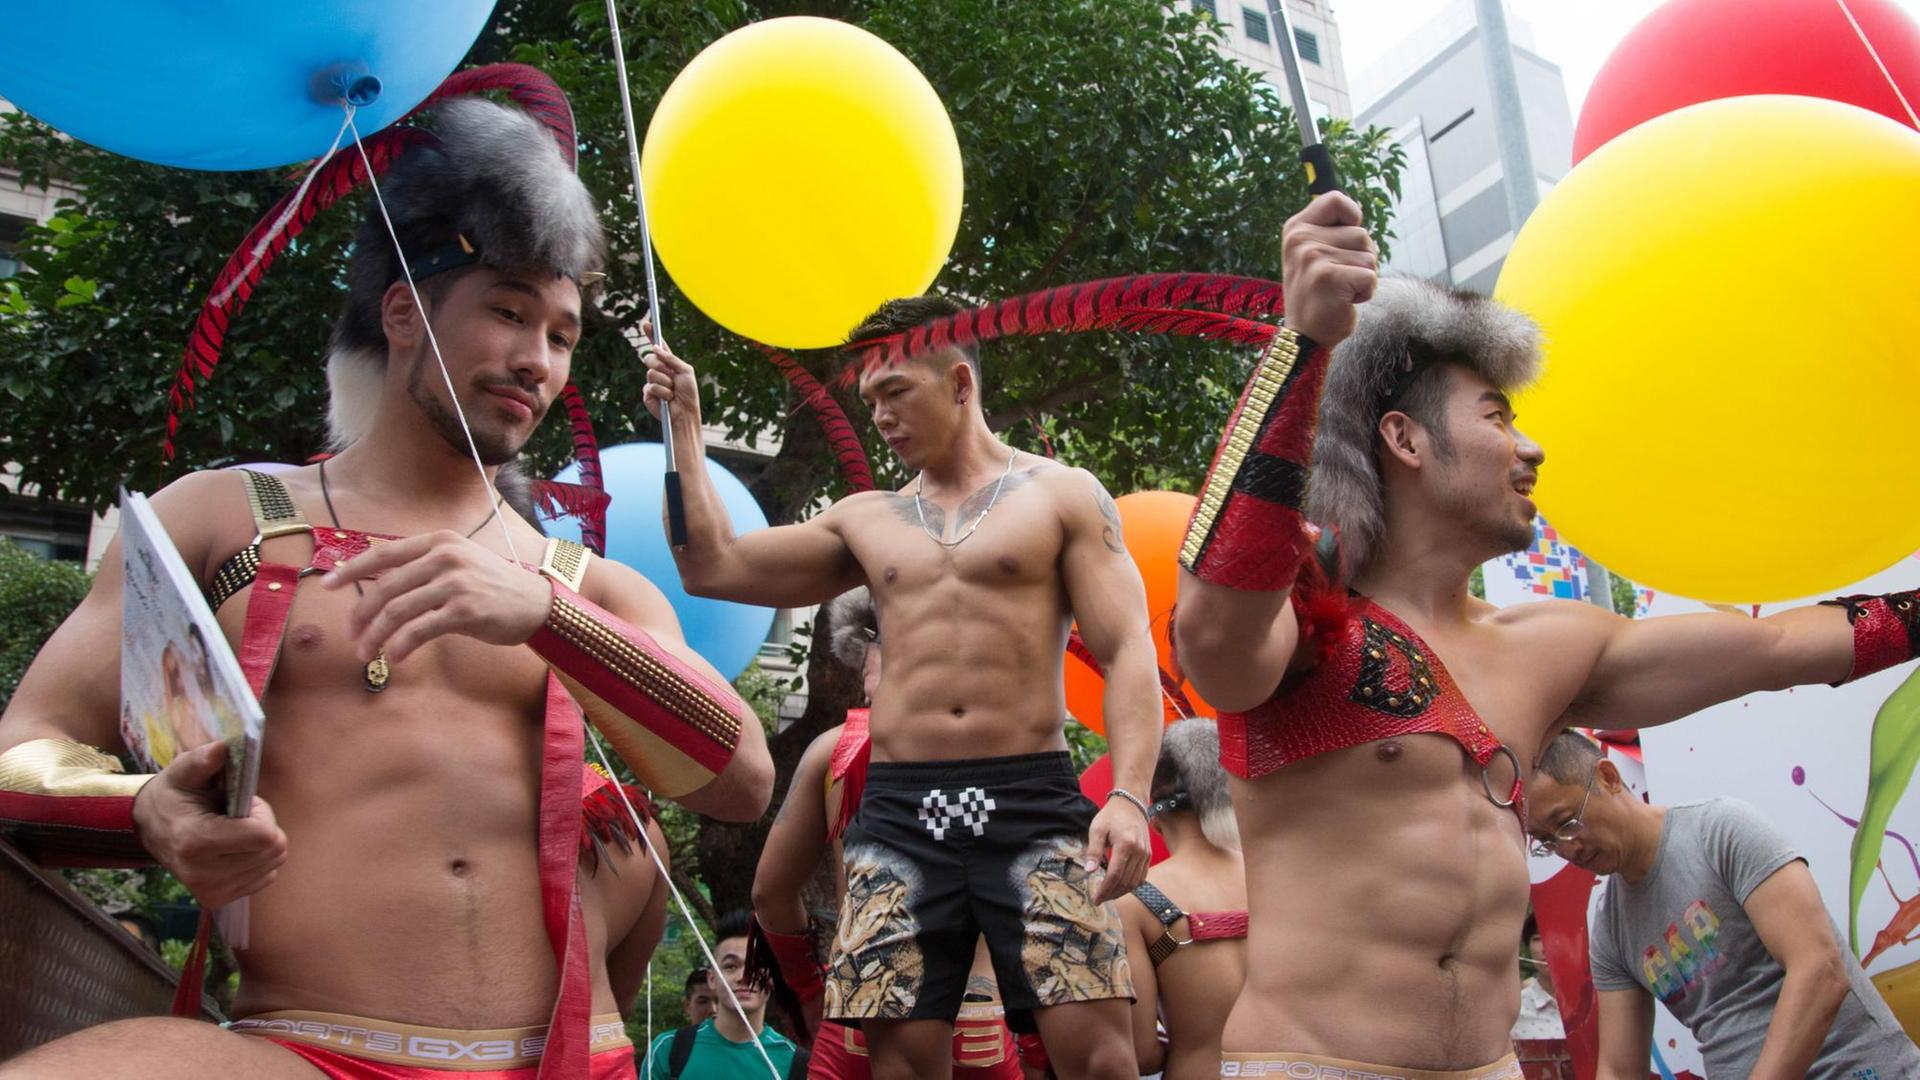 LGBT Pride 2016 in Taipeh